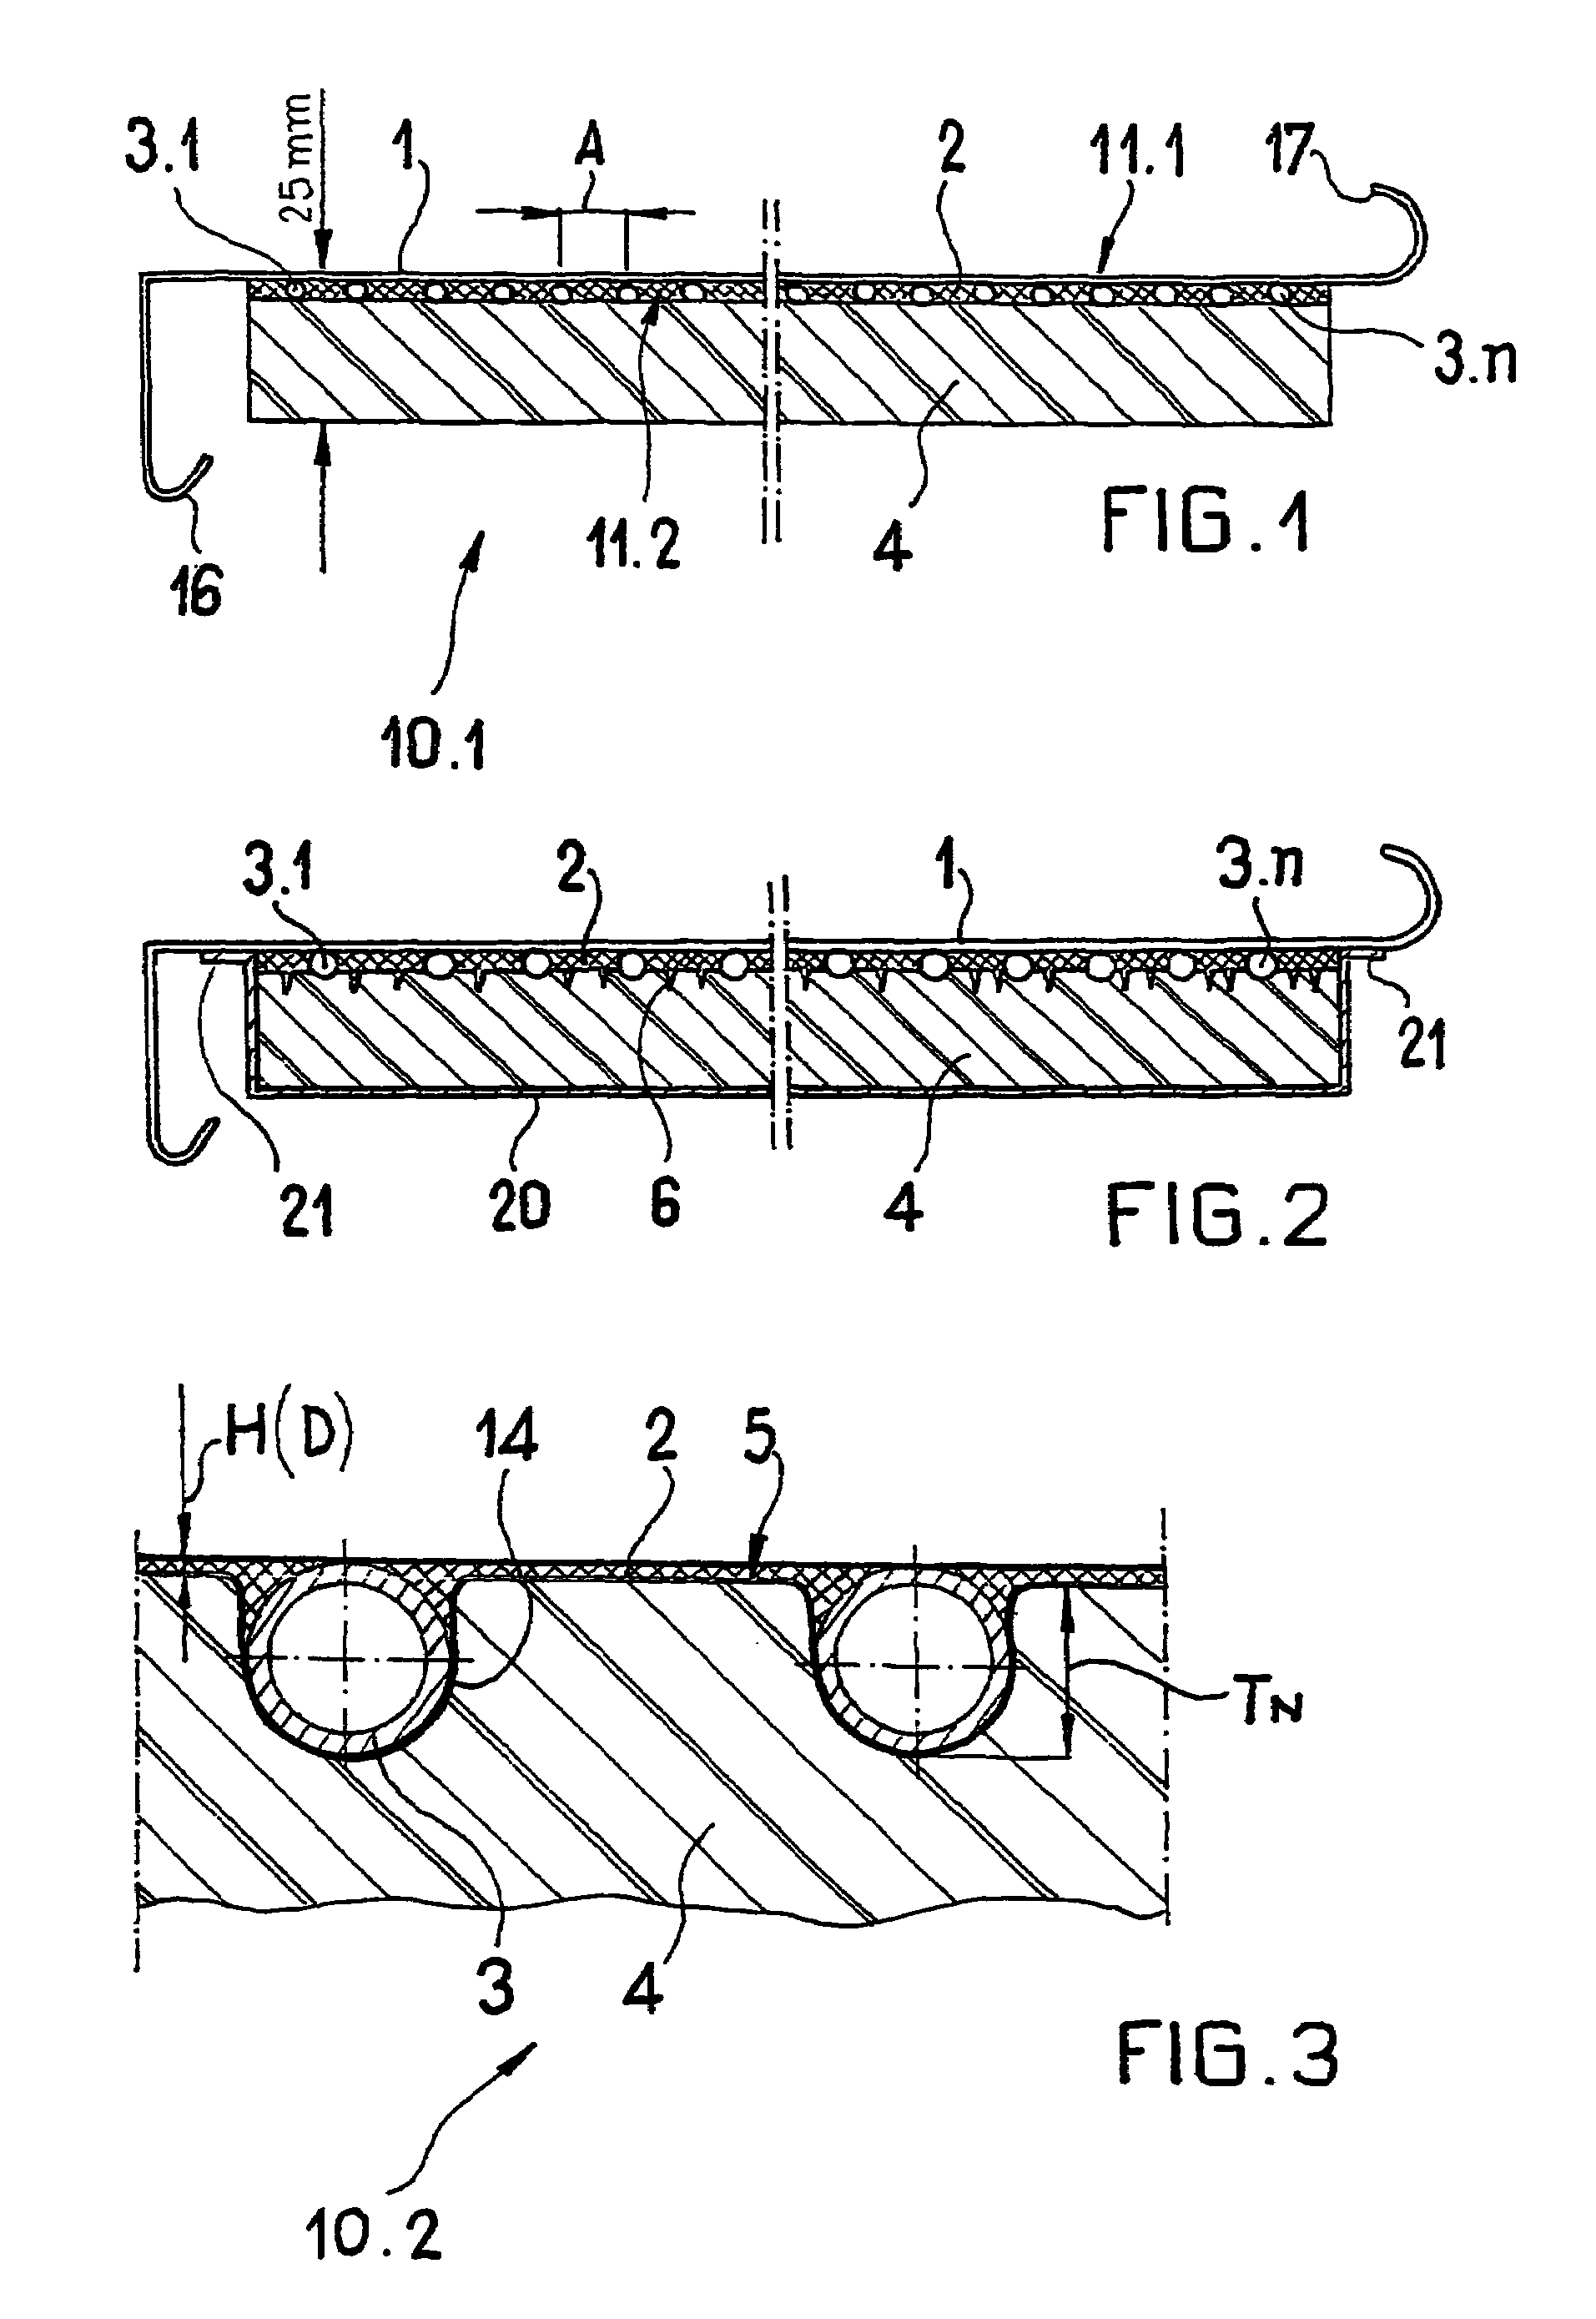 Heliothermal flat collector module having a sandwich structure